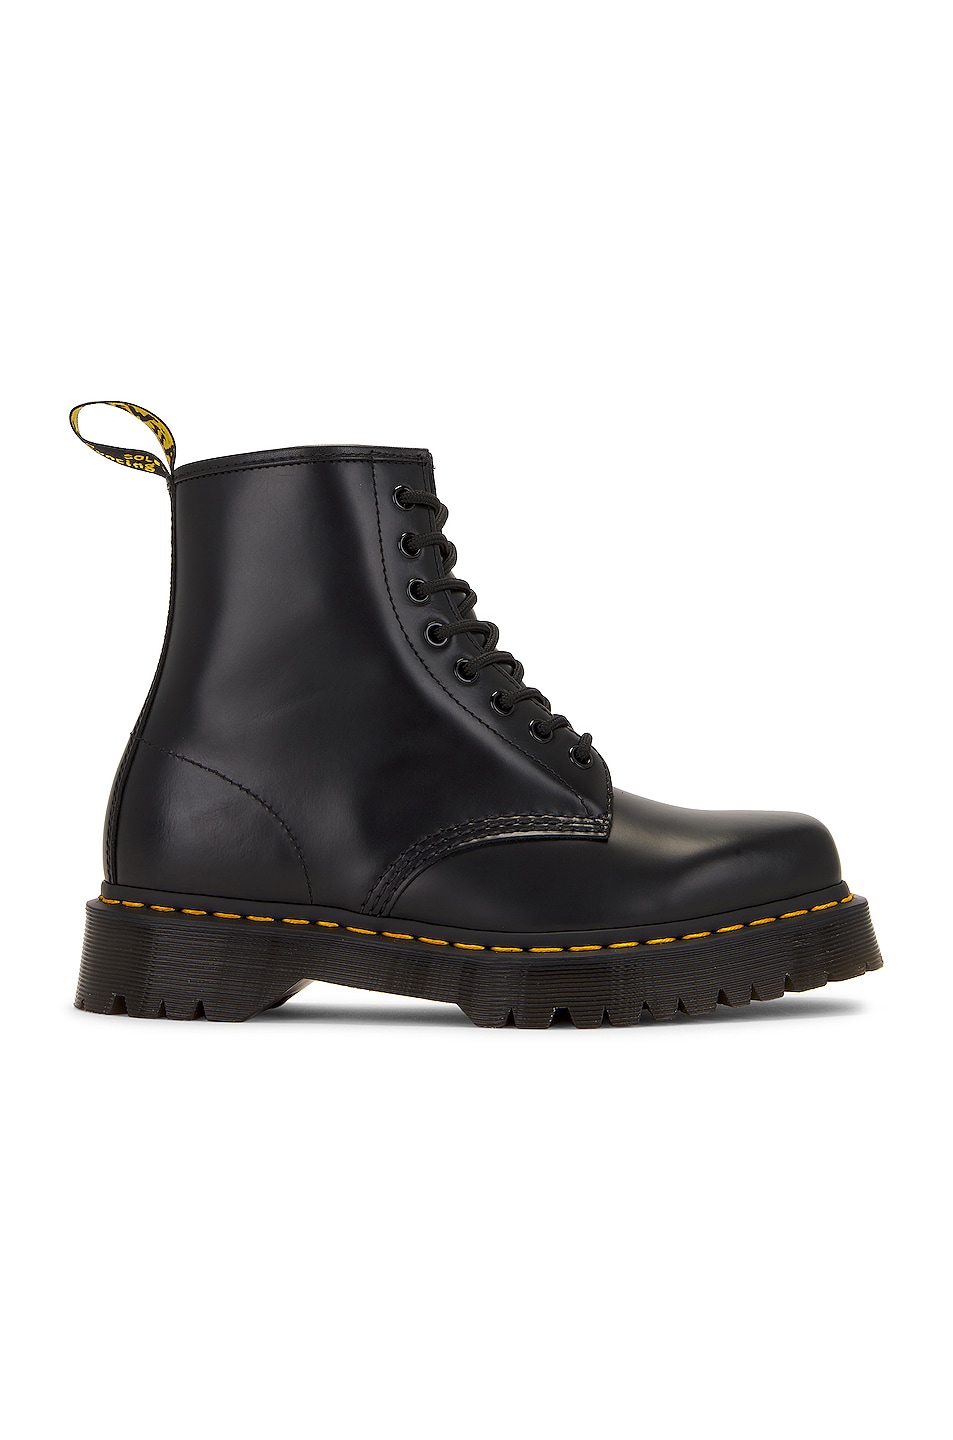 Image 1 of Dr. Martens 1460 Bex Squared Polished Smooth Boot in Black